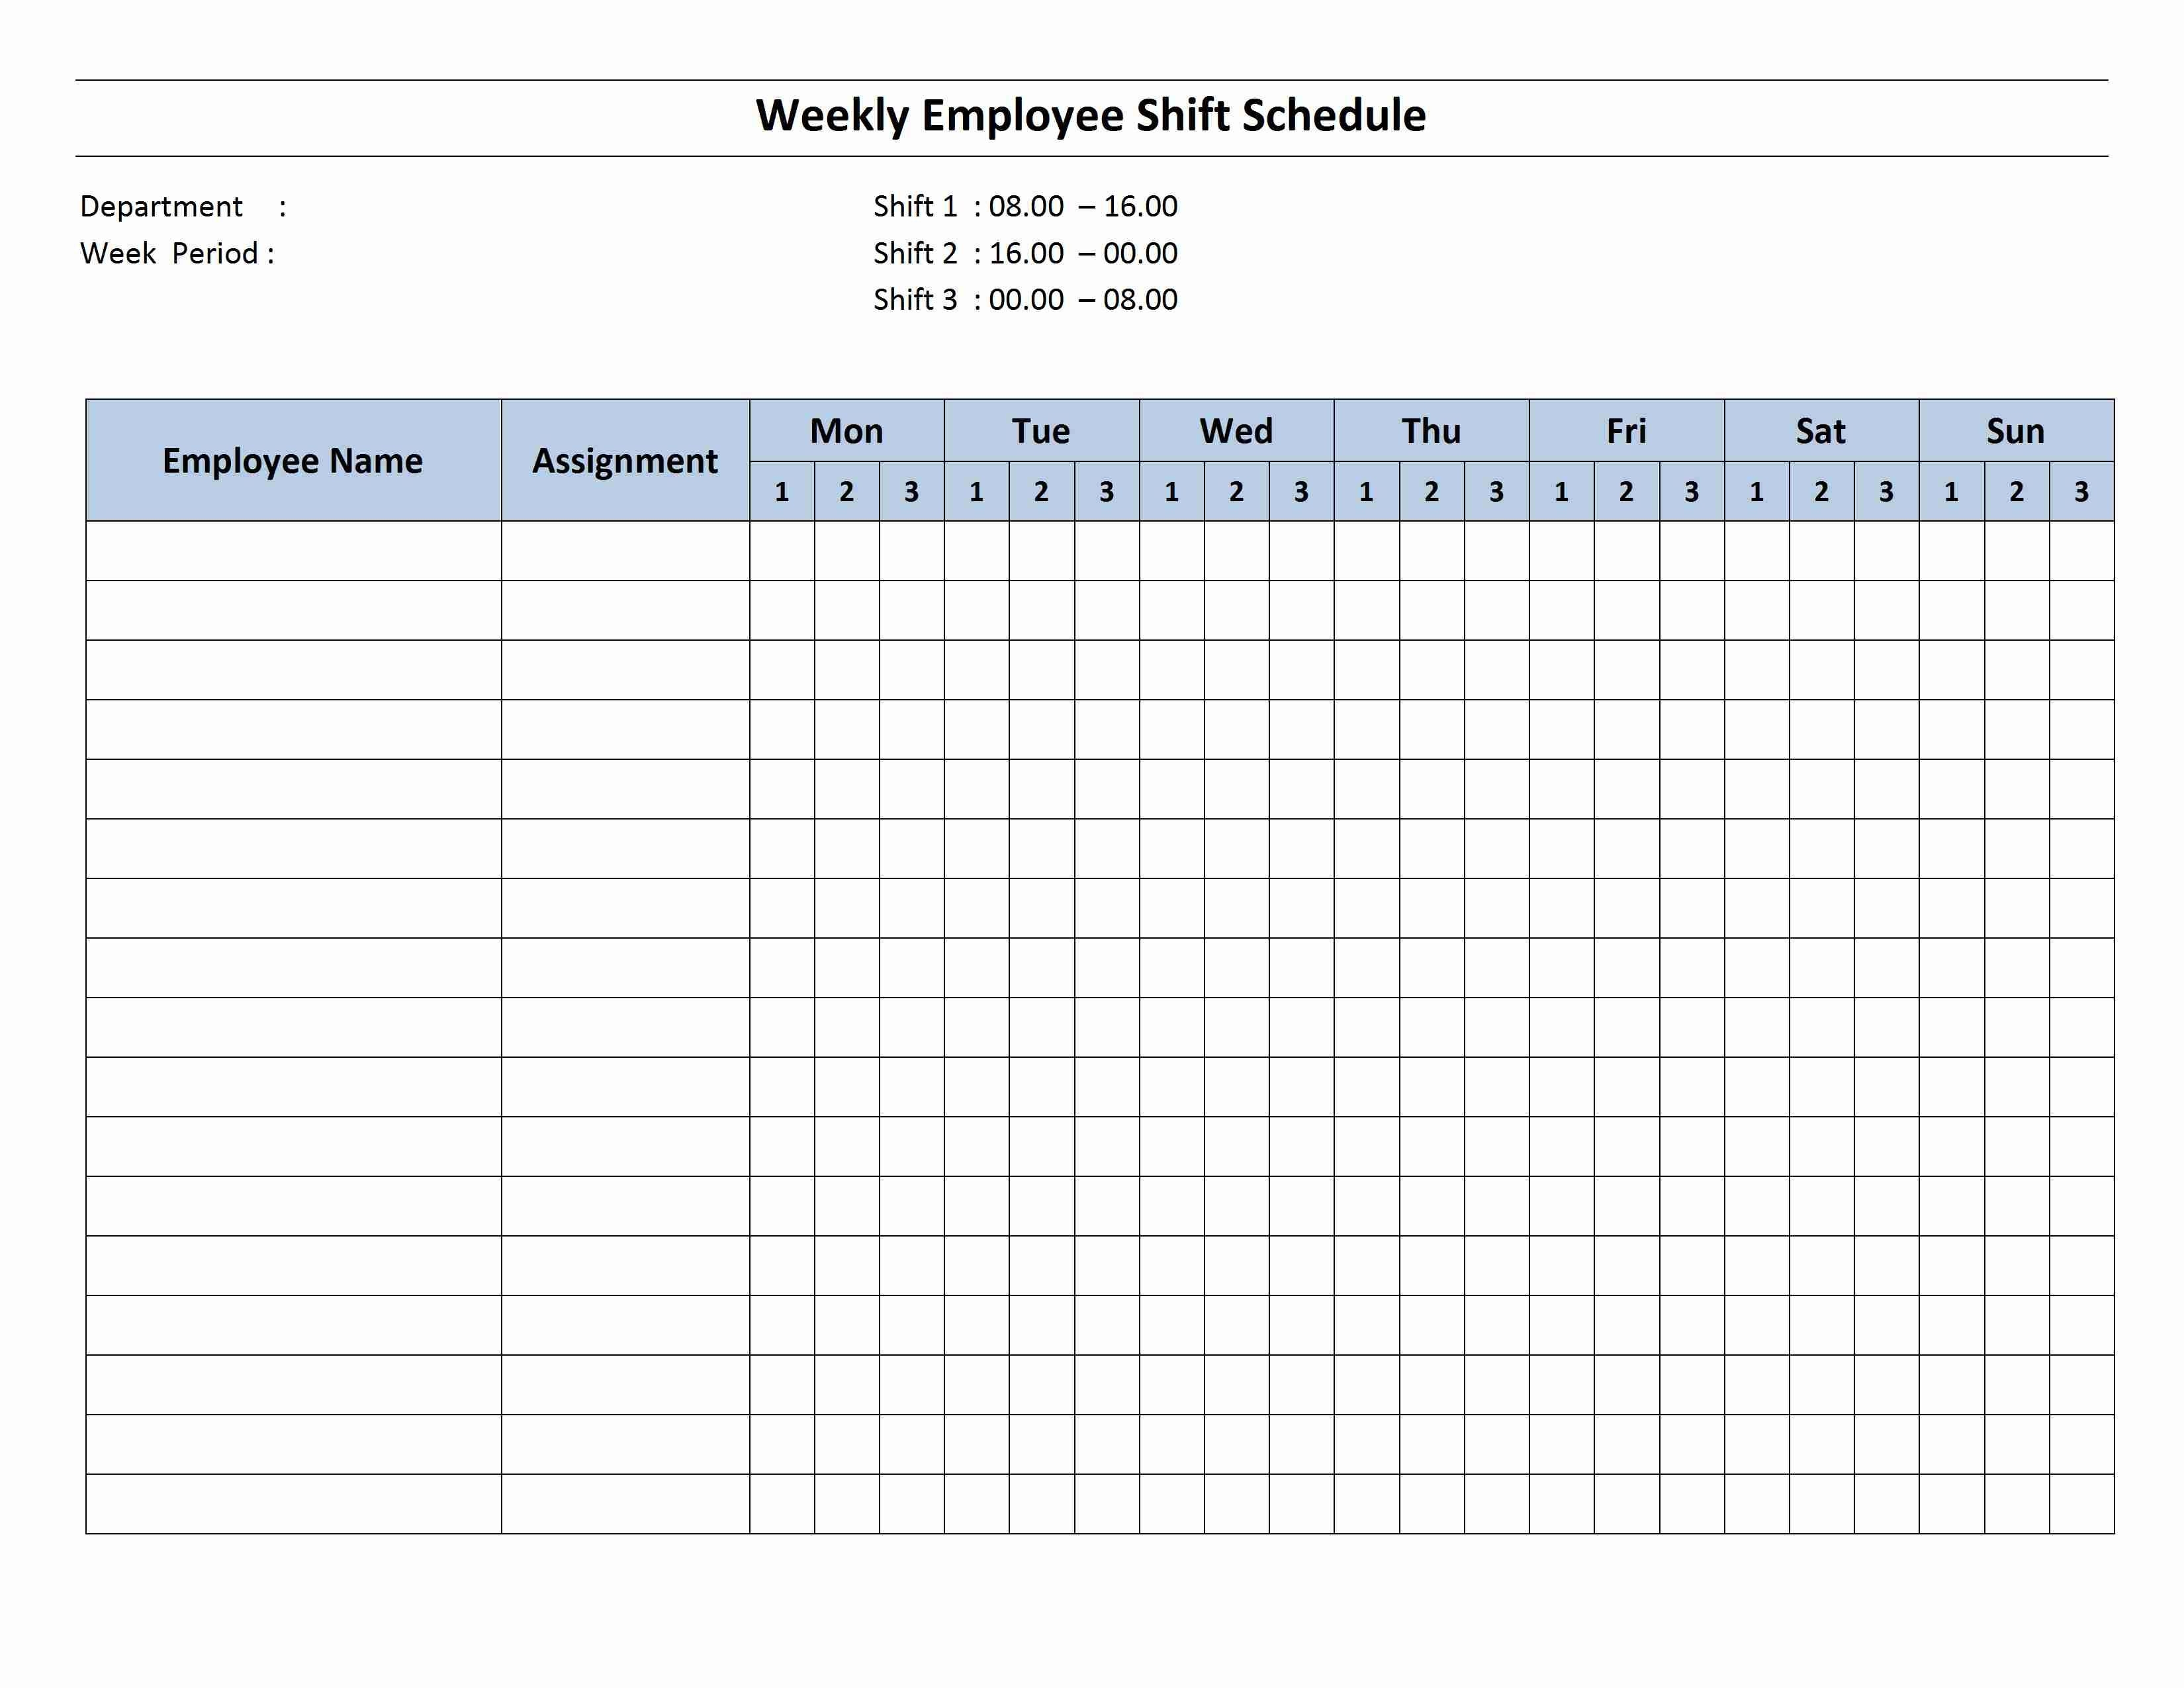 Remarkable Biweekly Pay Schedule Template Ideas Payroll-Pay Schedule Template 2020